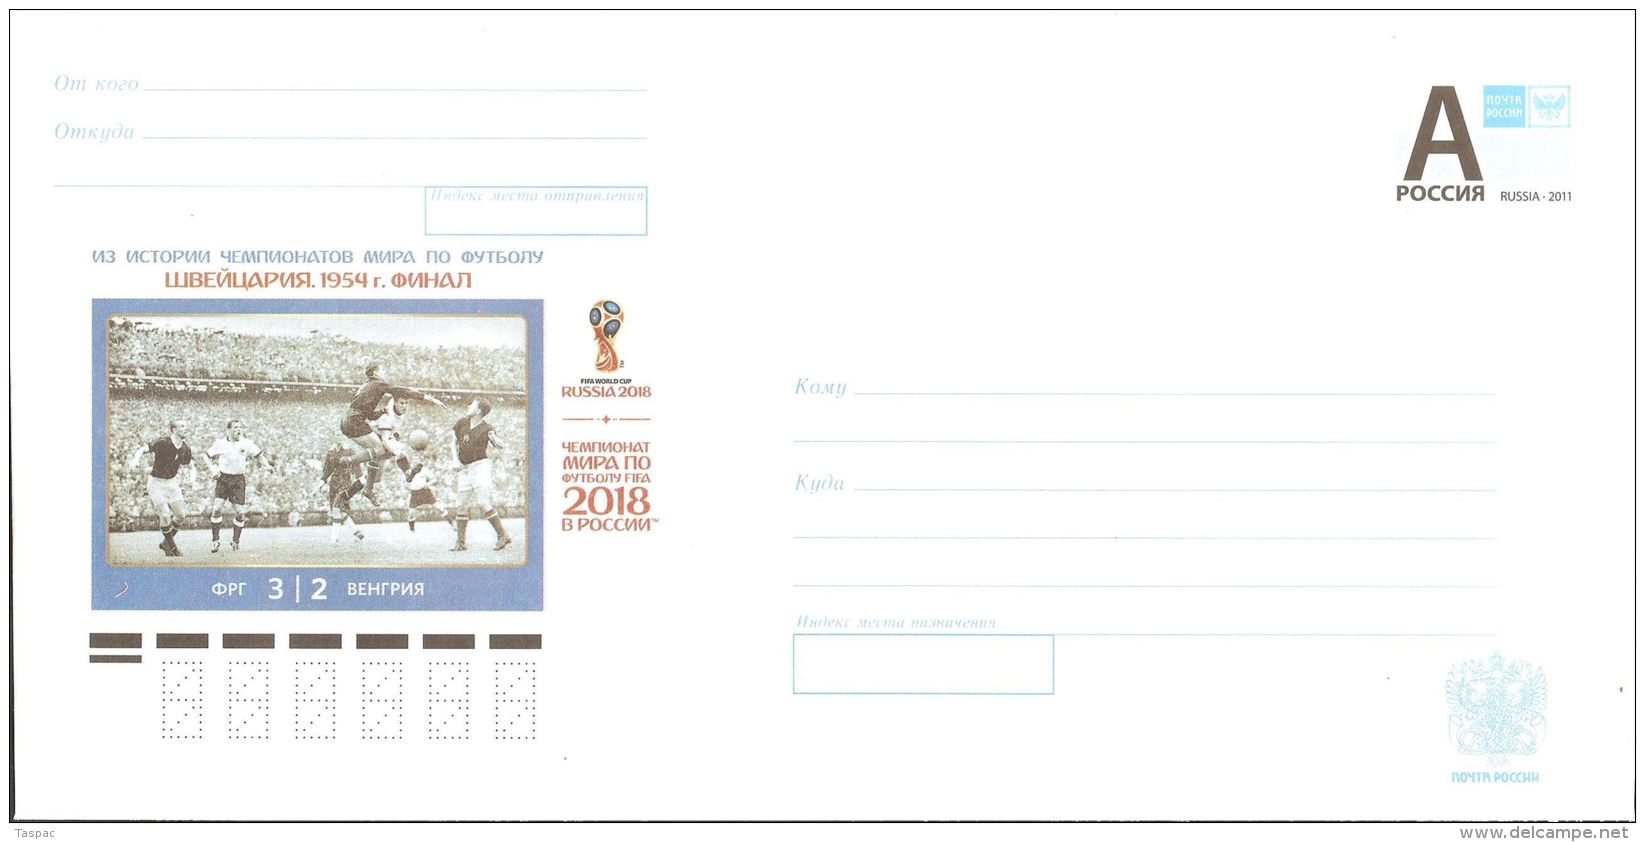 Russia 2015 # 147 Postal Stationery Cover Unused - History Of World Cup Soccer Championship, Switzerland 1954 - 1954 – Zwitserland